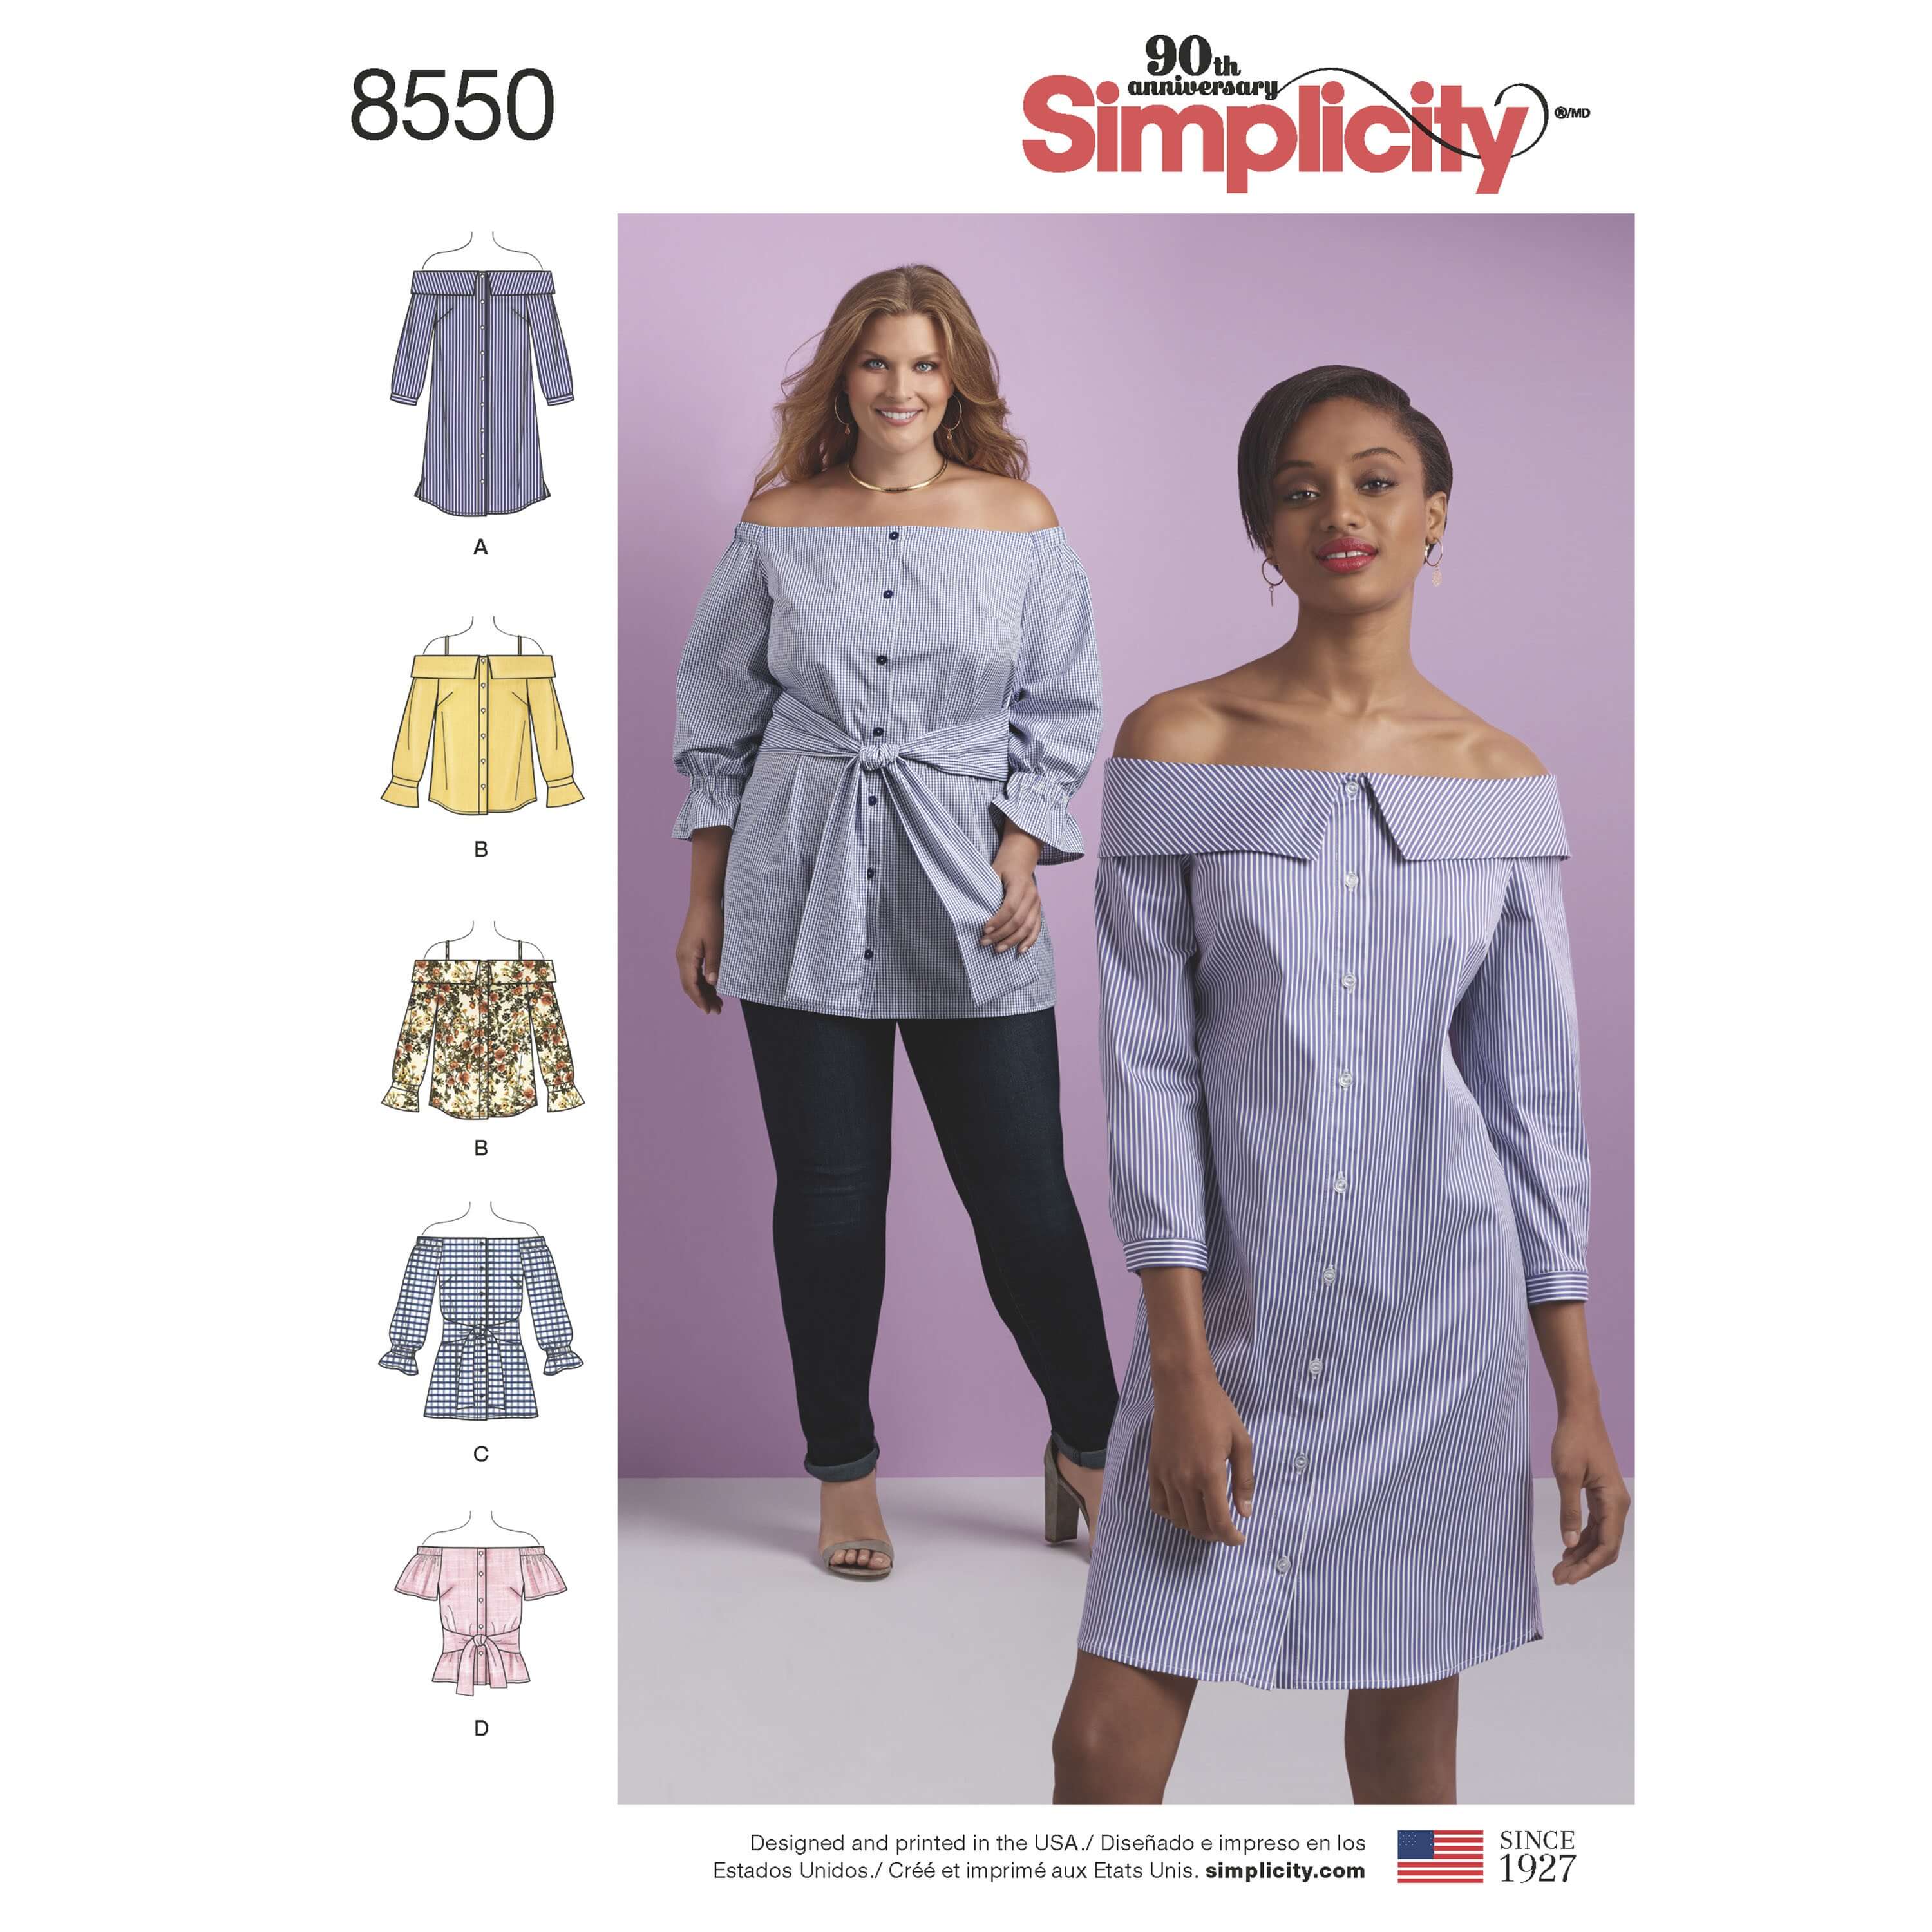 Simplicity Sewing Pattern 8550 Misses Off the Shoulder Tunic Blouse or Shirt